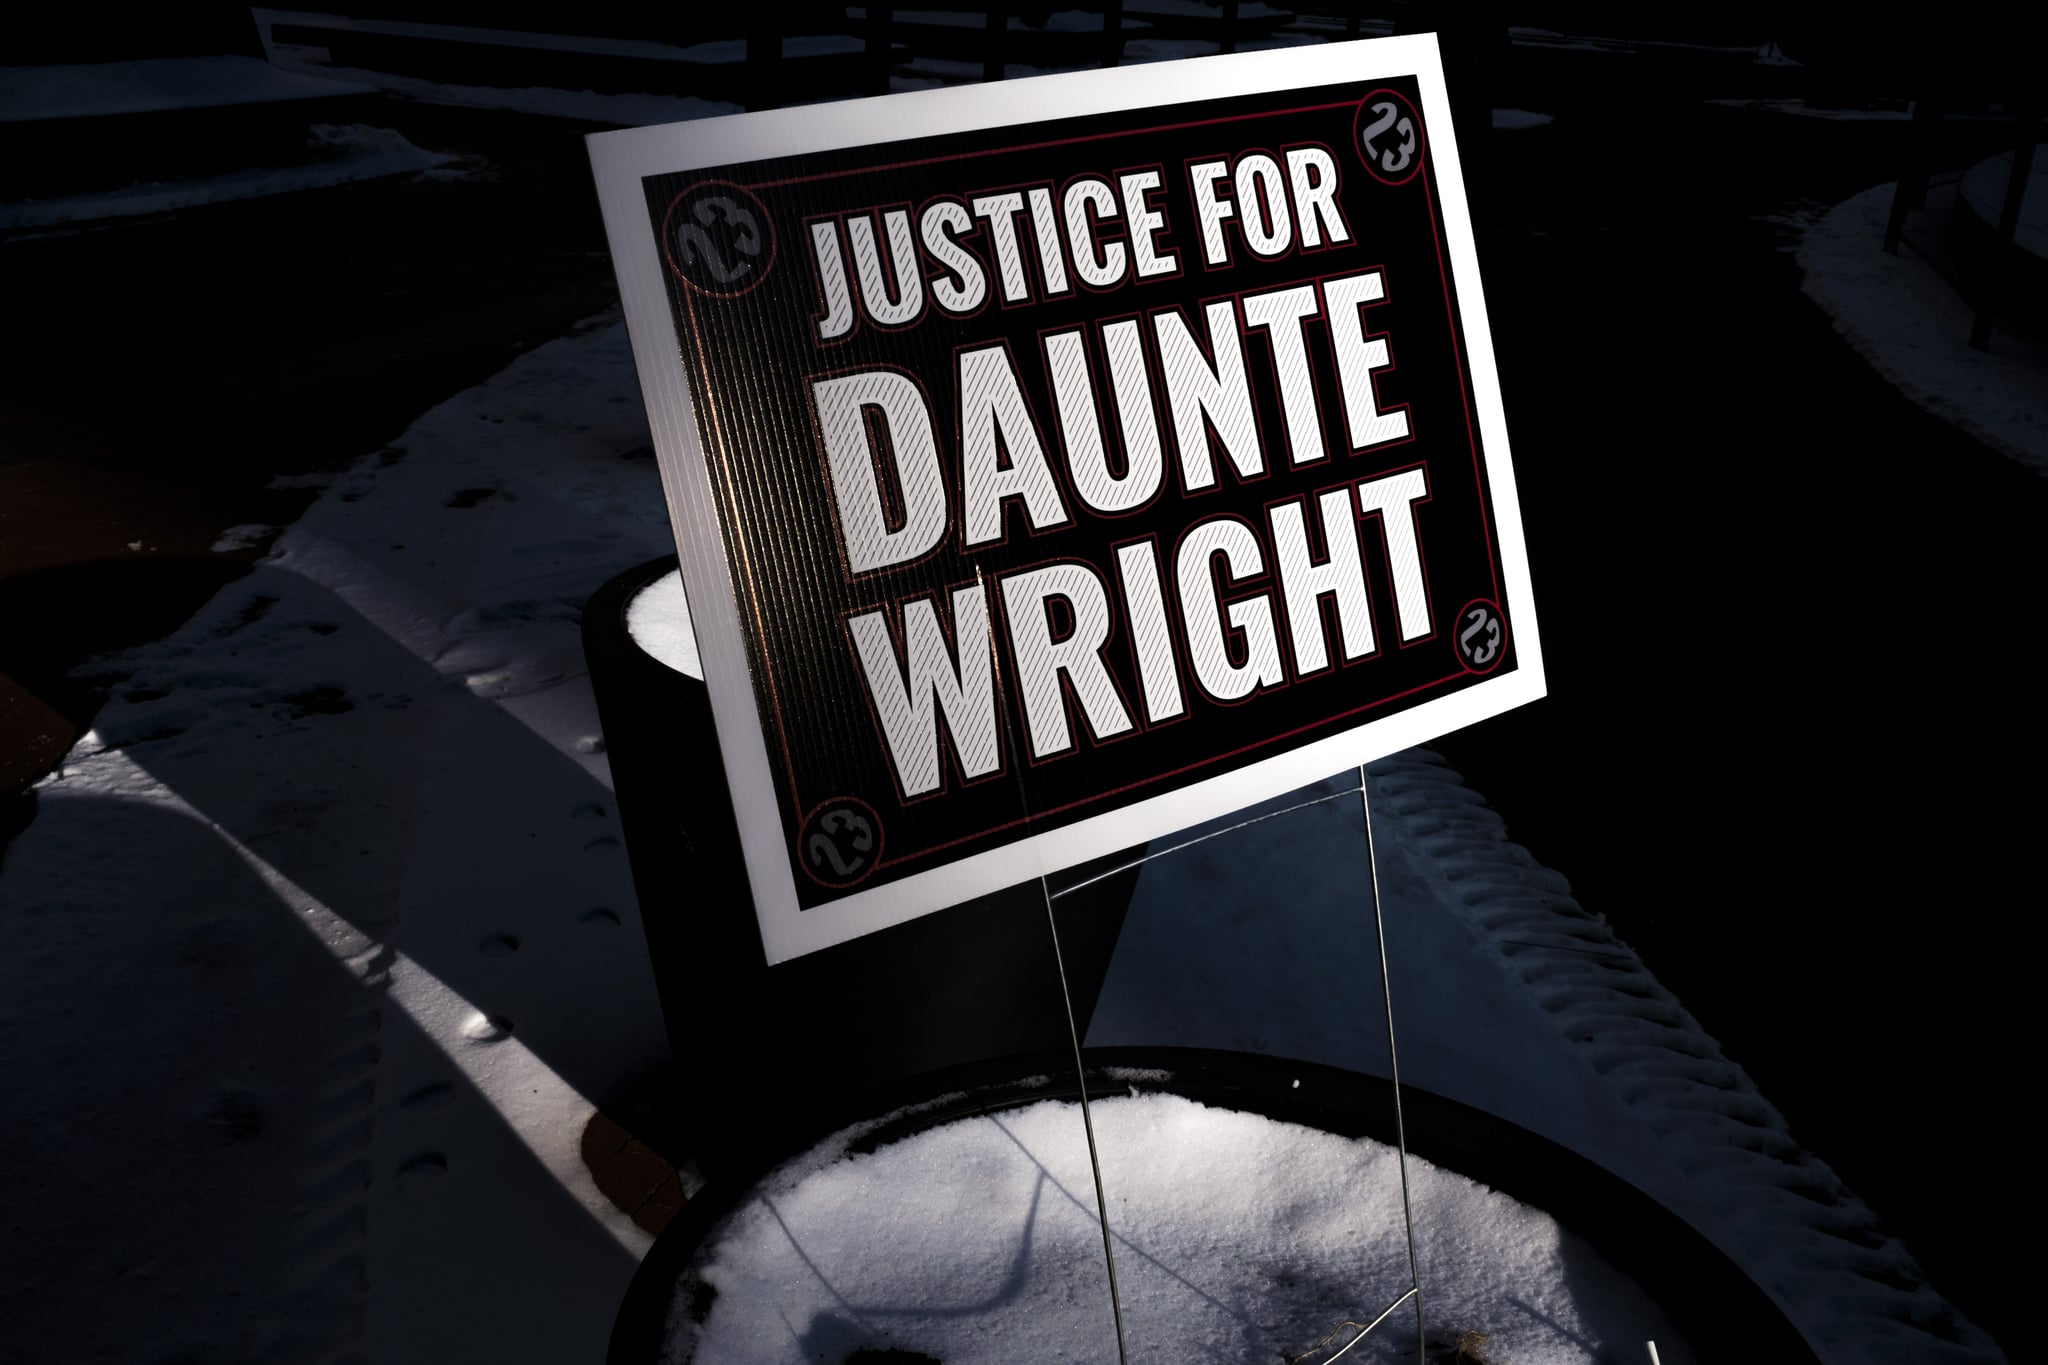 MINNEAPOLIS, MN - DECEMBER 23: A sign reading Justice for Daunte Wright is placed outside the Hennepin County Government Centre on December 23, 2021 in Minneapolis, Minnesota. Jury deliberations are ongoing in the trial of former Brooklyn Centre police officer Kim Potter, who is charged with manslaughter in the April 2021 shooting death of Daunte Wright. Potter says she thought she was using her Taser when she shot Wright with her handgun. (Photo by Stephen Maturen/Getty Images)